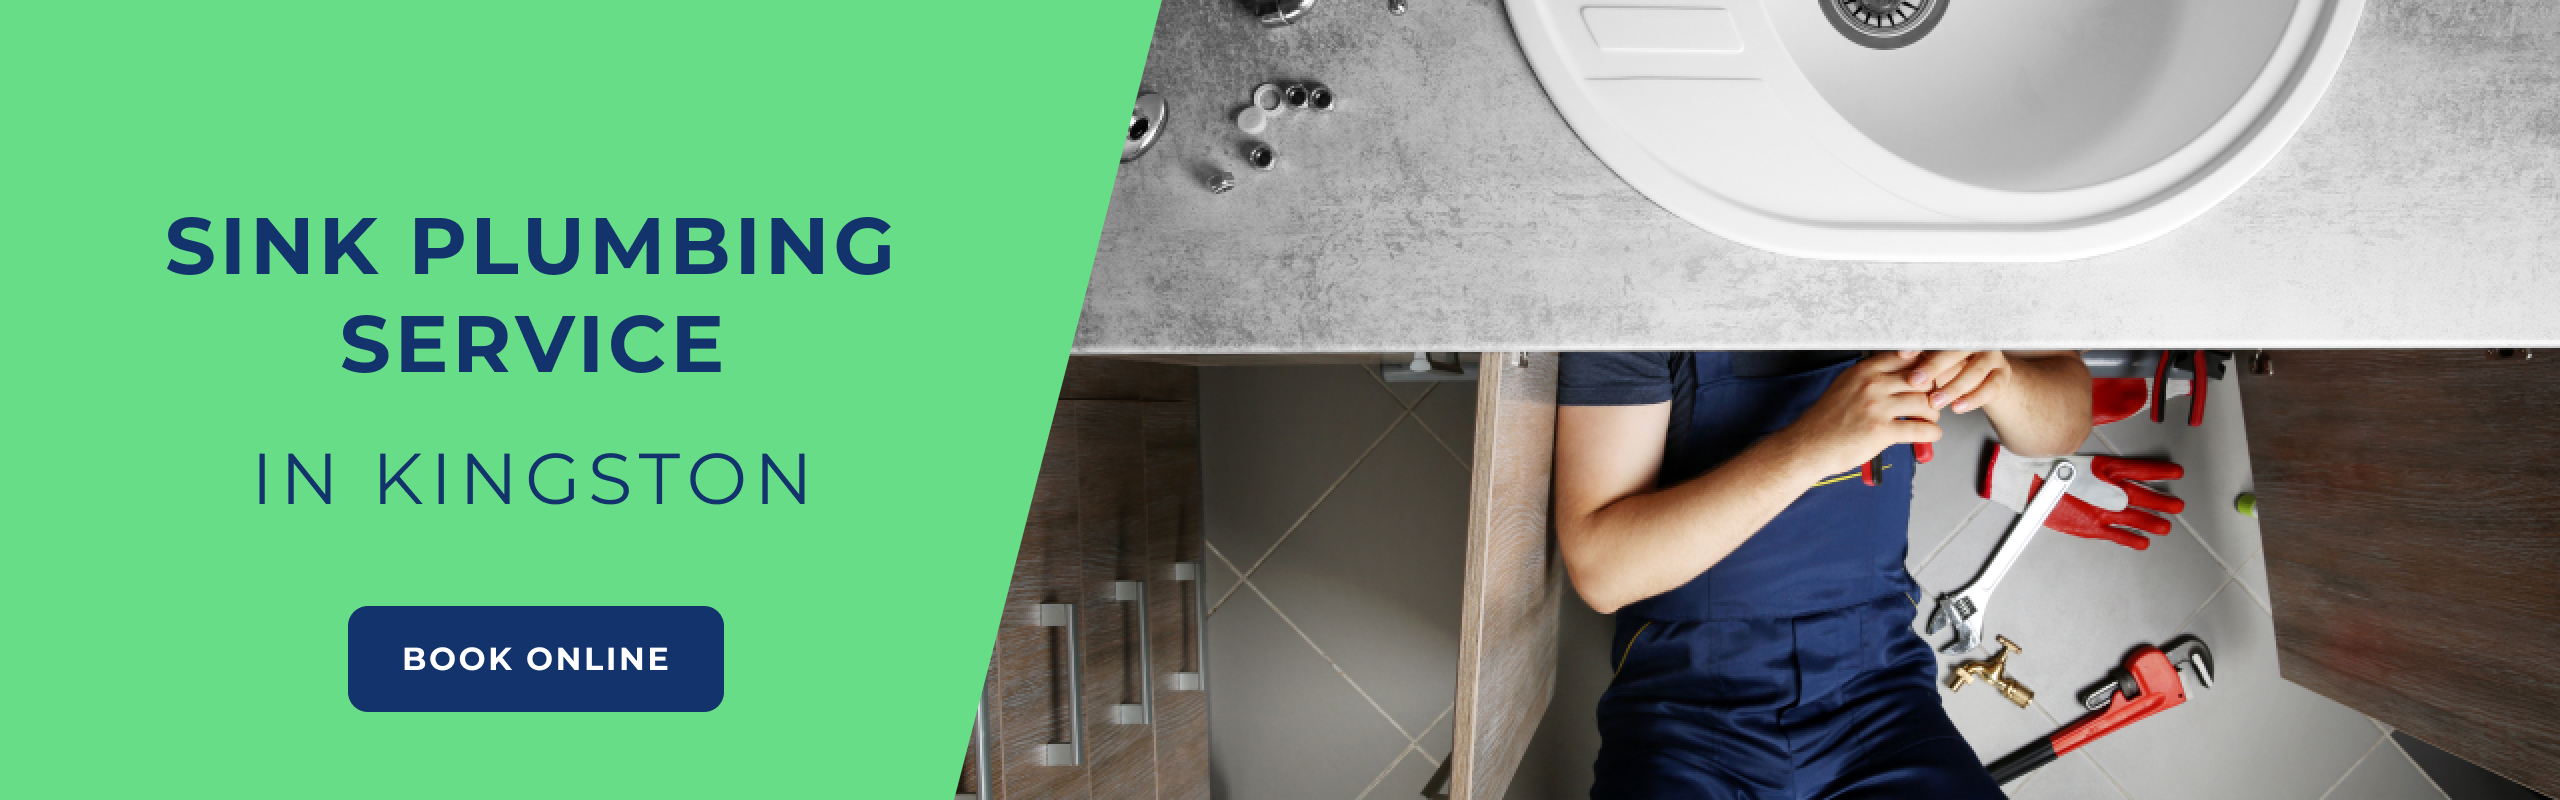 Sink Services in Kingston: Save up to 25% on plumbing services